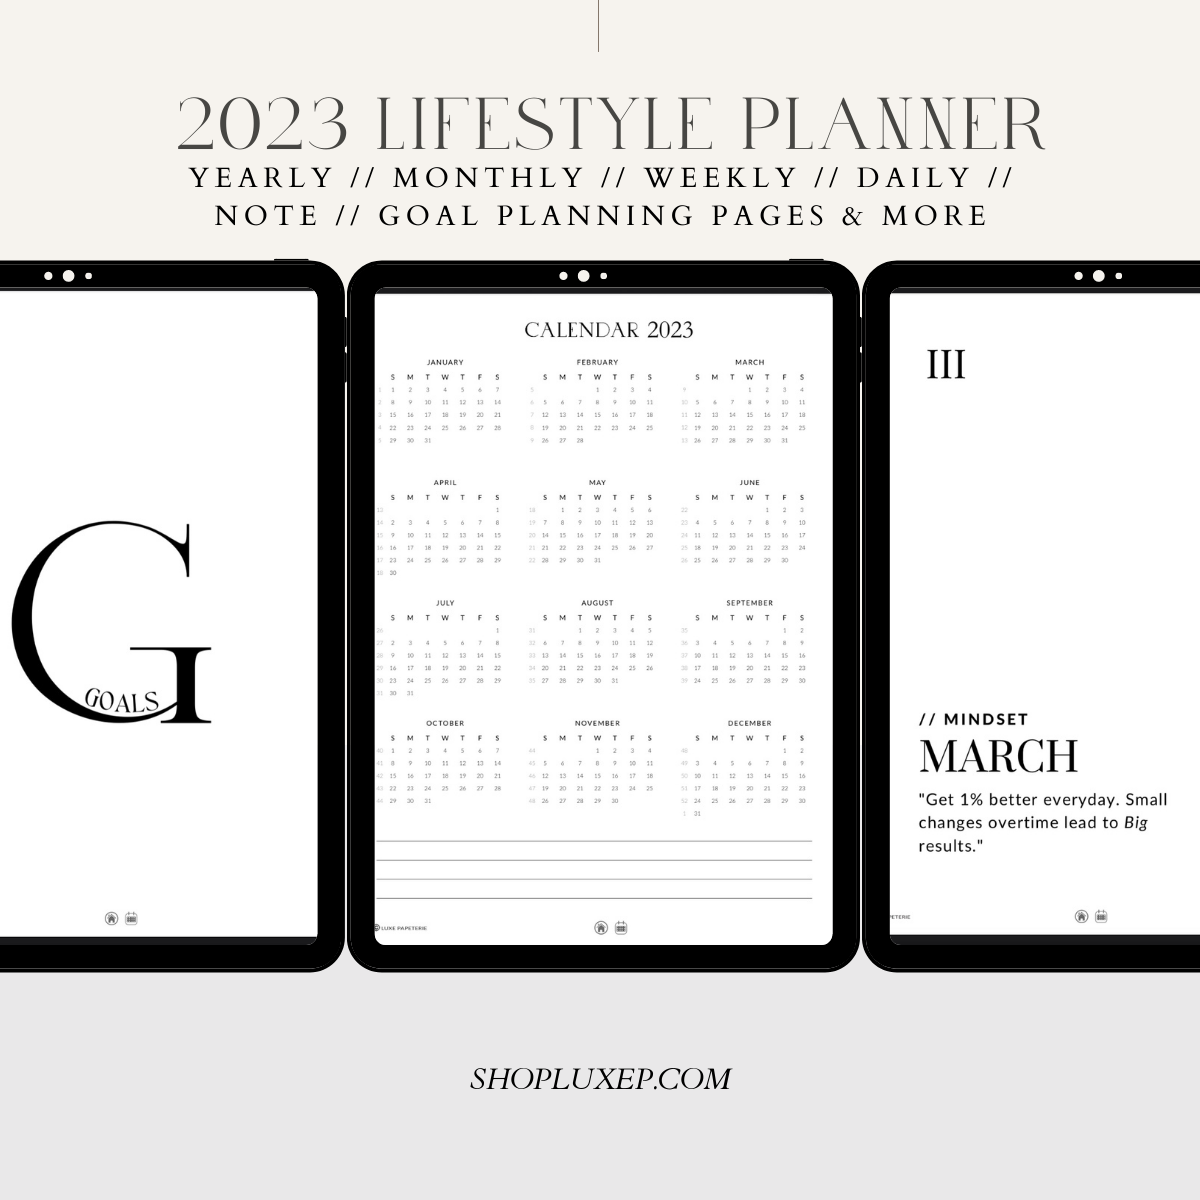 2023 Minimalist Digital Lifestyle Planner - Goodnotes 2023 planner - Noteability planner - 2023 ipad planner - 2023 Digital lifestyle planner - 2023 weekly planner - 2023 health tracker and planner 